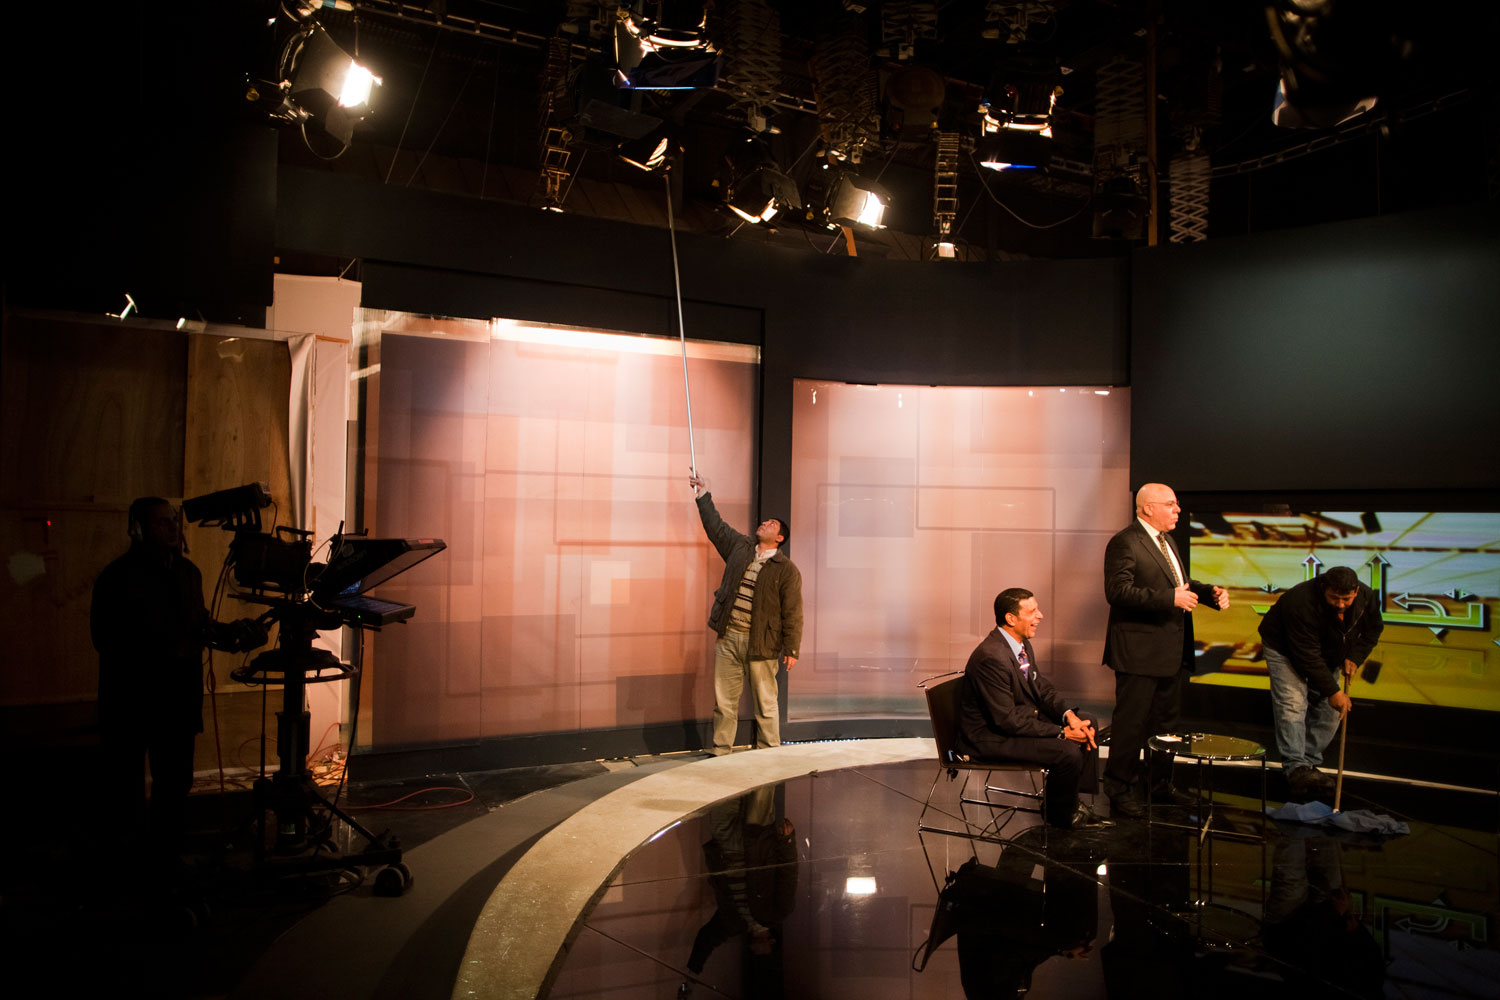 A studio TV crew prepares for the program 'Direction,' presented by Amro Shinawi, in the TV building where over 20 state TV programs are produced. Approximately 46,000 people work inside the building and are protected by barbed wire and Republican Guard soldiers.